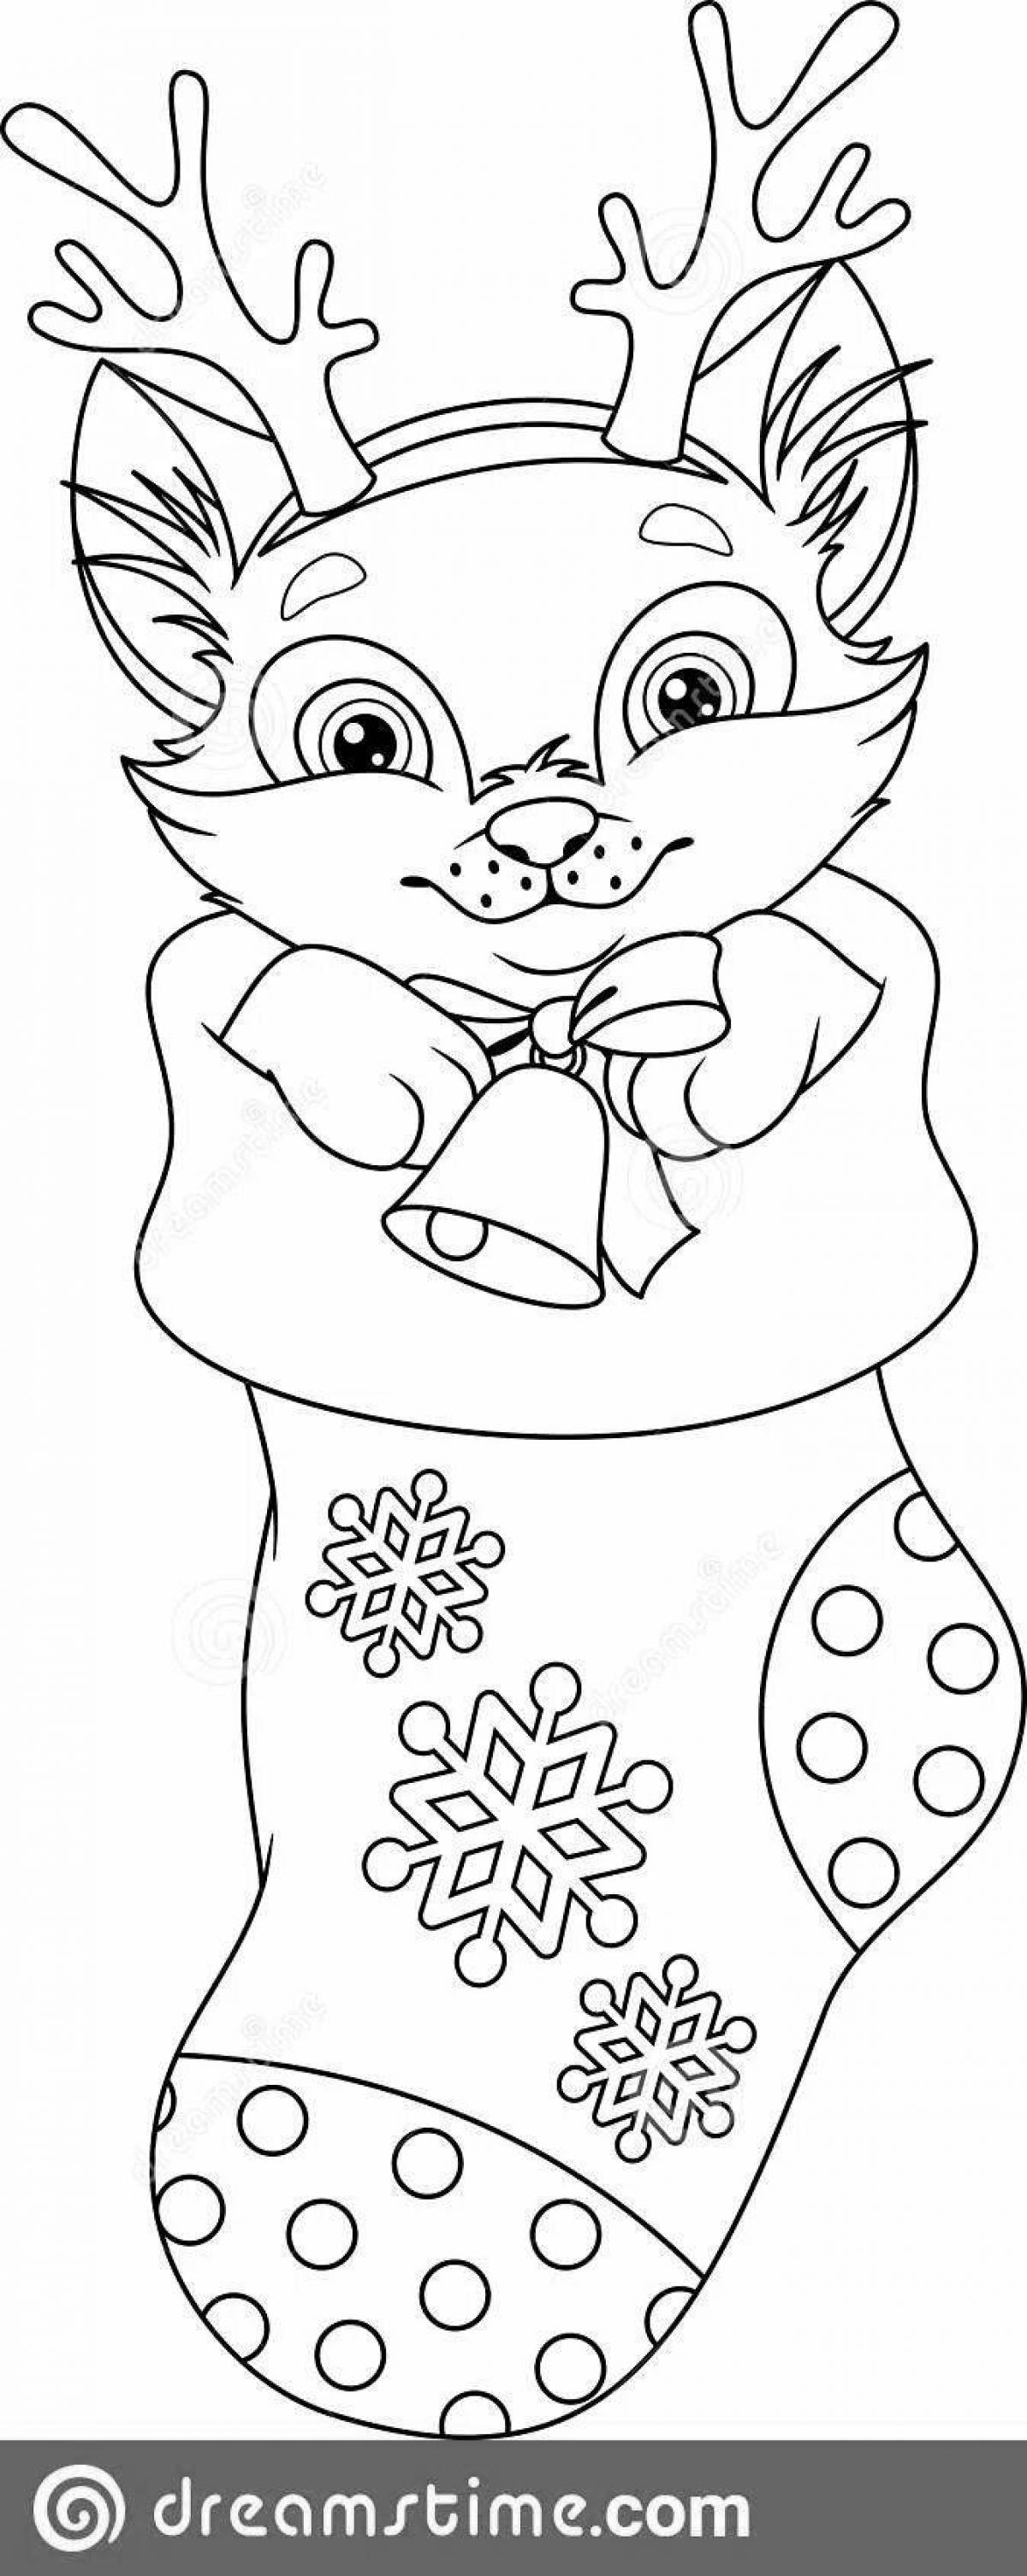 Dazzling Christmas cat coloring book